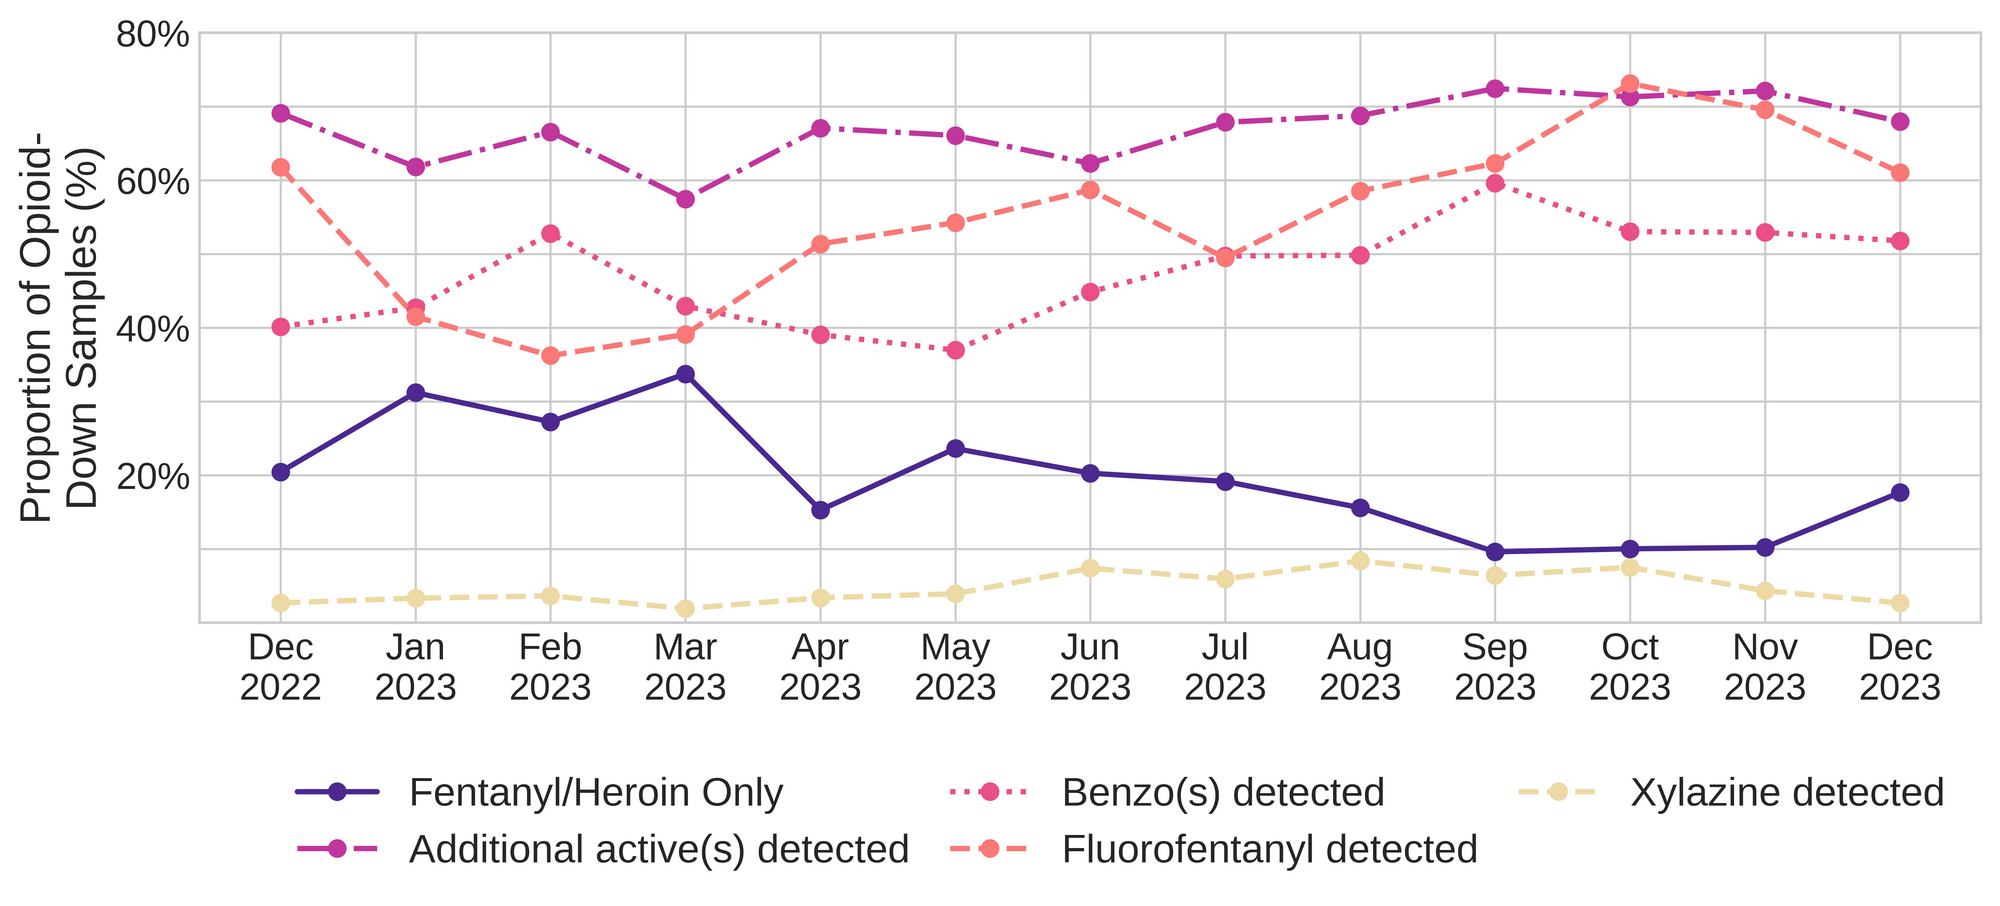 Figure 3. The percentage of expected opioid-down samples checked between December 2022 and December 2023 that only contained fentanyl/heroin actives (solid dark purple), opioid-down samples with an additional active detected (dot-dashed light purple), opioid-down samples that contained a benzodiazepine-related drug (dotted magenta), opioid-down samples that contained fluorofentanyl (dashed salmon), and opioid-down samples that contained xylazine (dashed yellow).